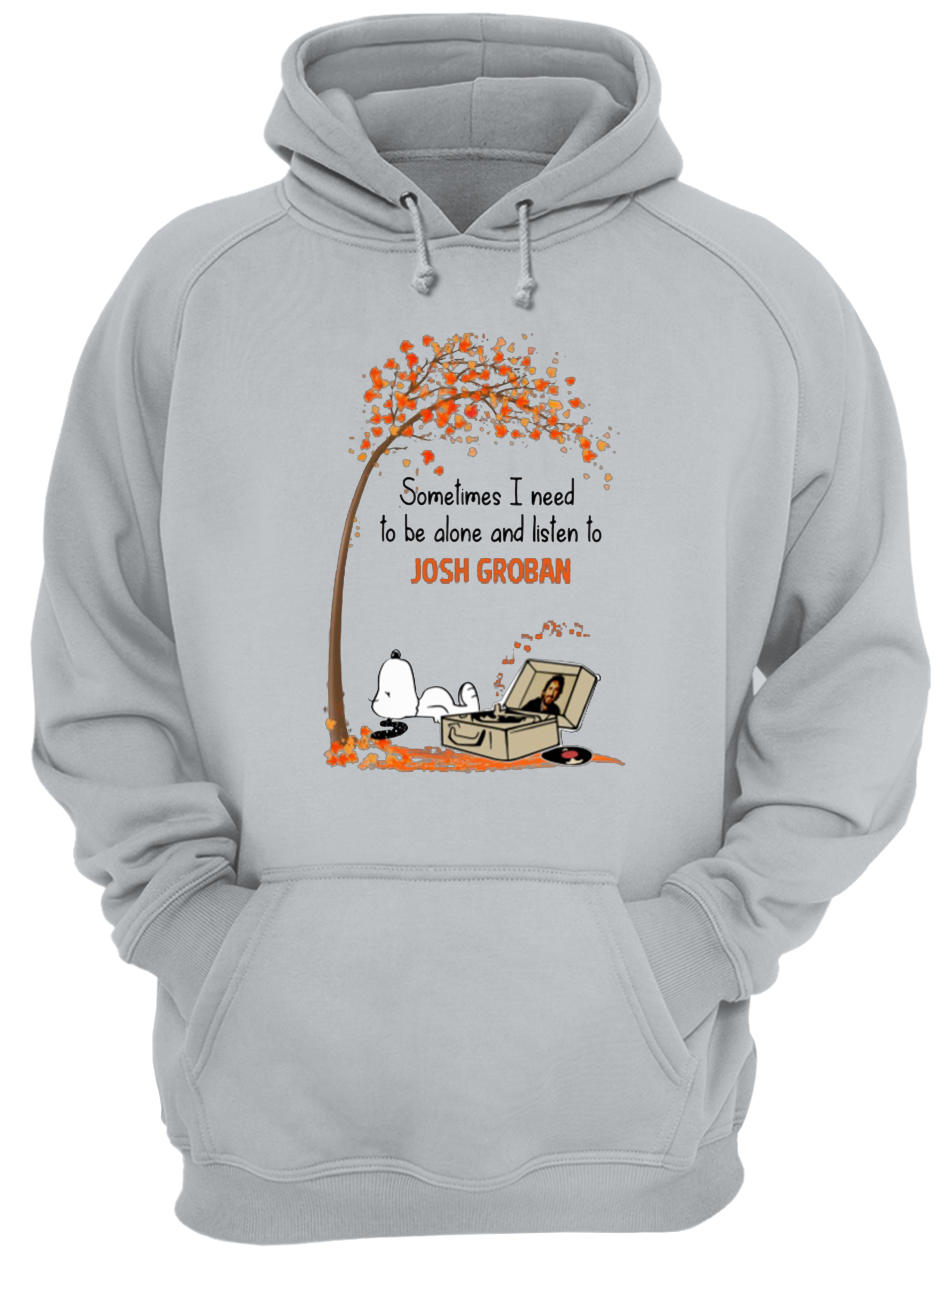 Snoopy sometimes I need to be alone and listen to josh groban hoodie